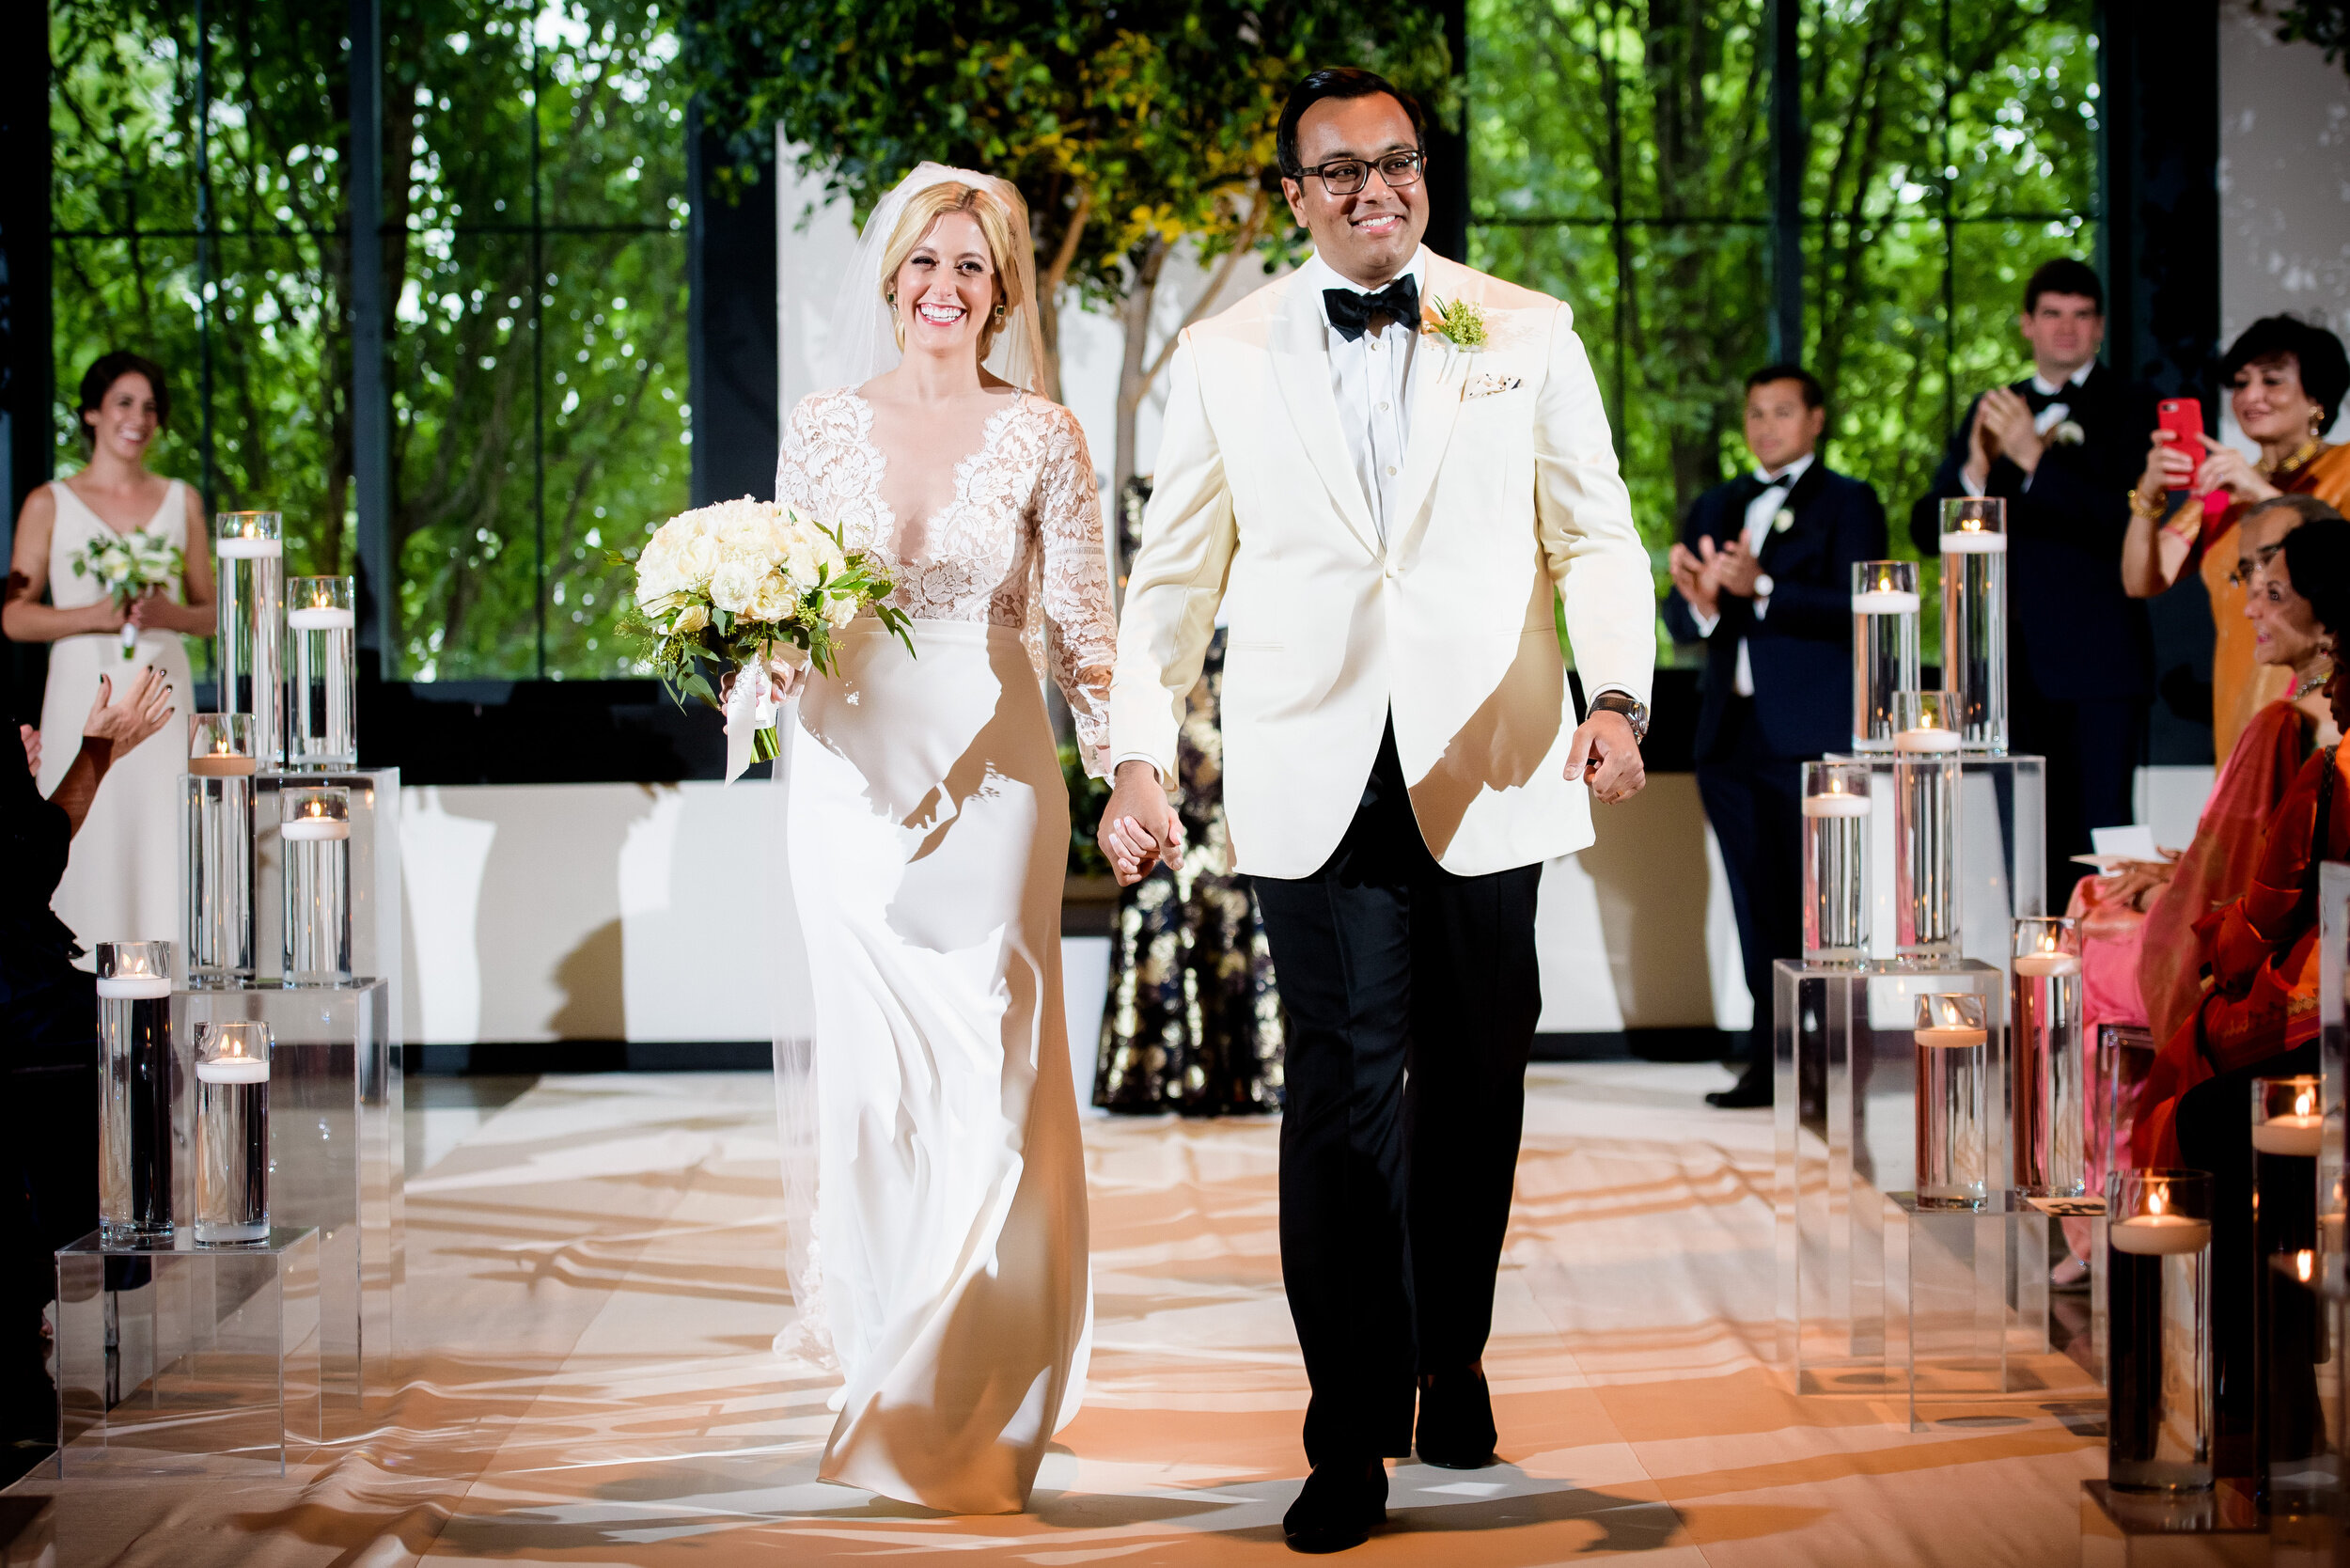 Newly weds walk down the aisle: Geraghty Chicago wedding photography captured by J. Brown Photography.